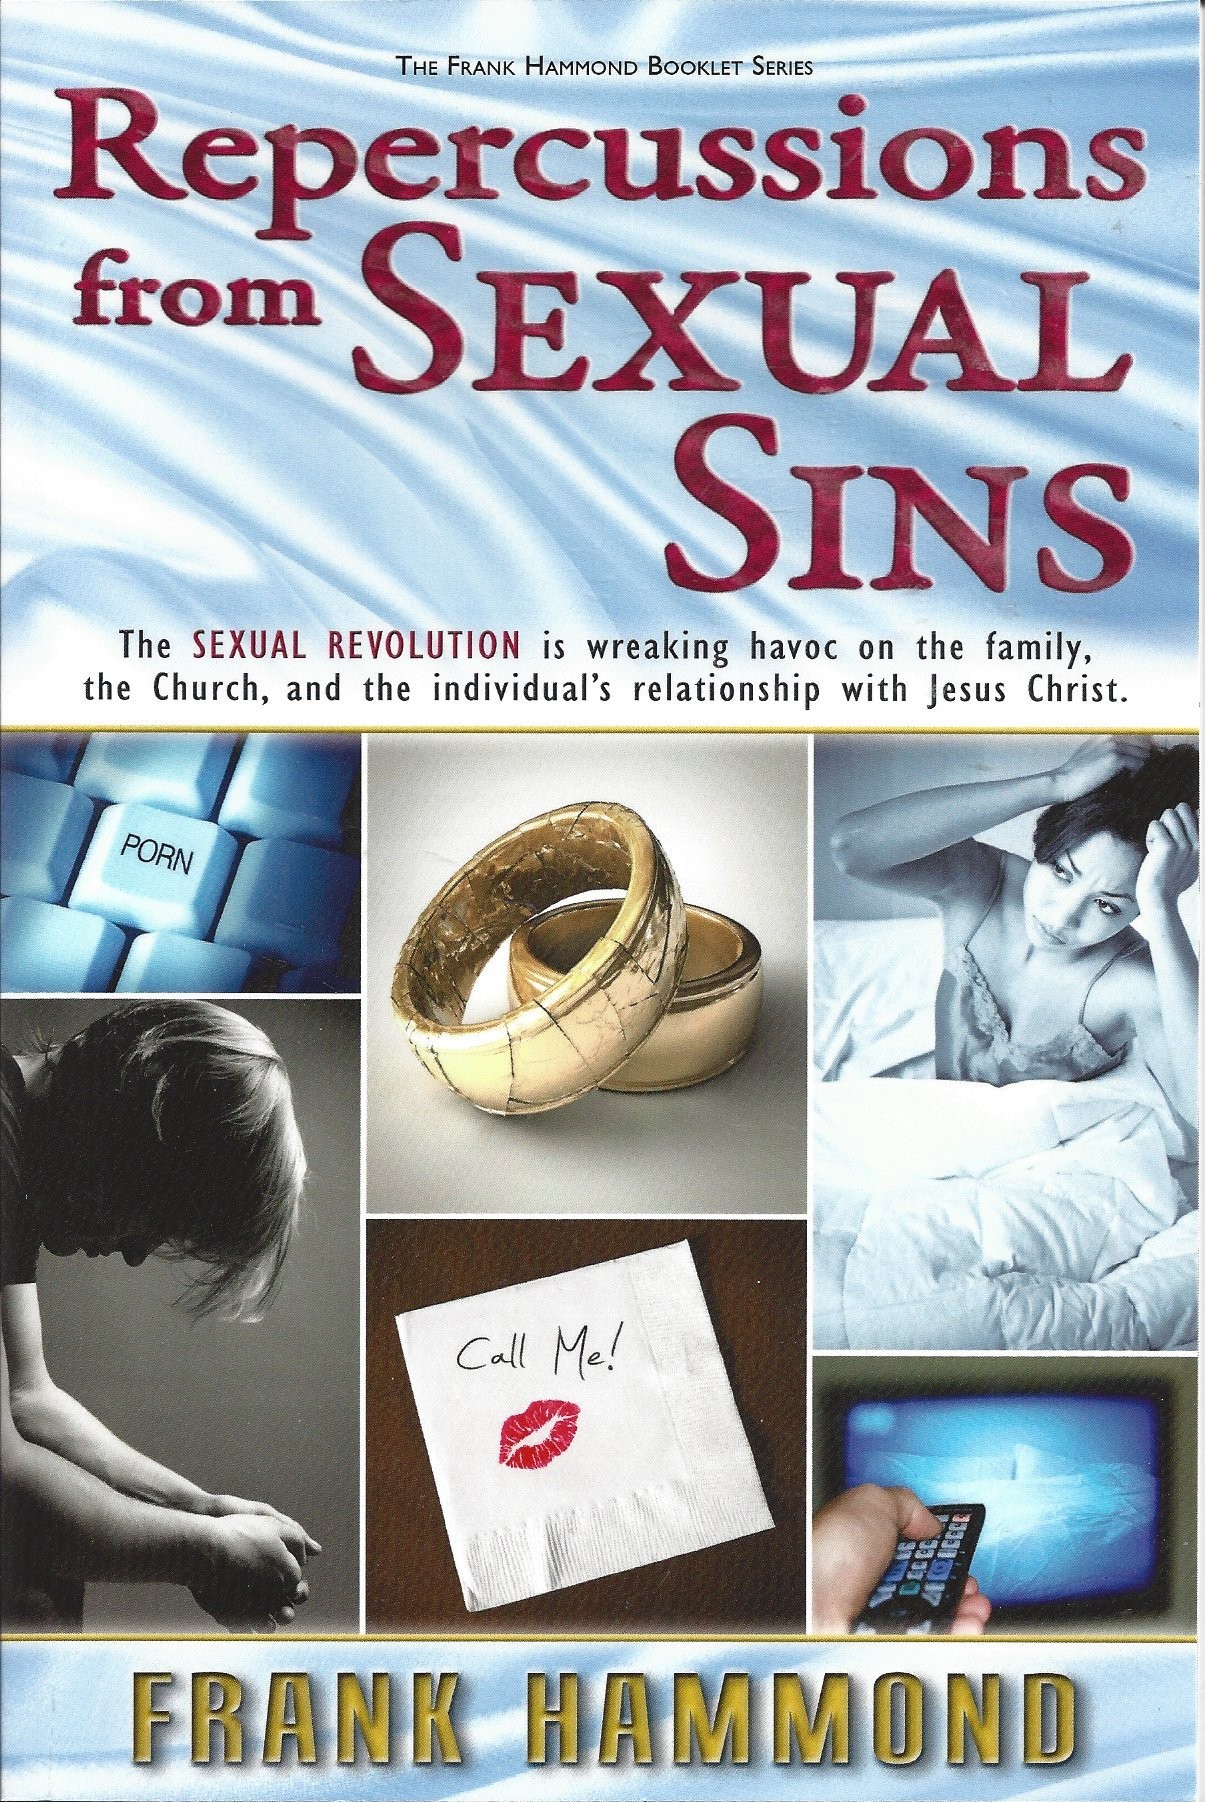 Repercussions From Sexual Sins  (2002)  Front